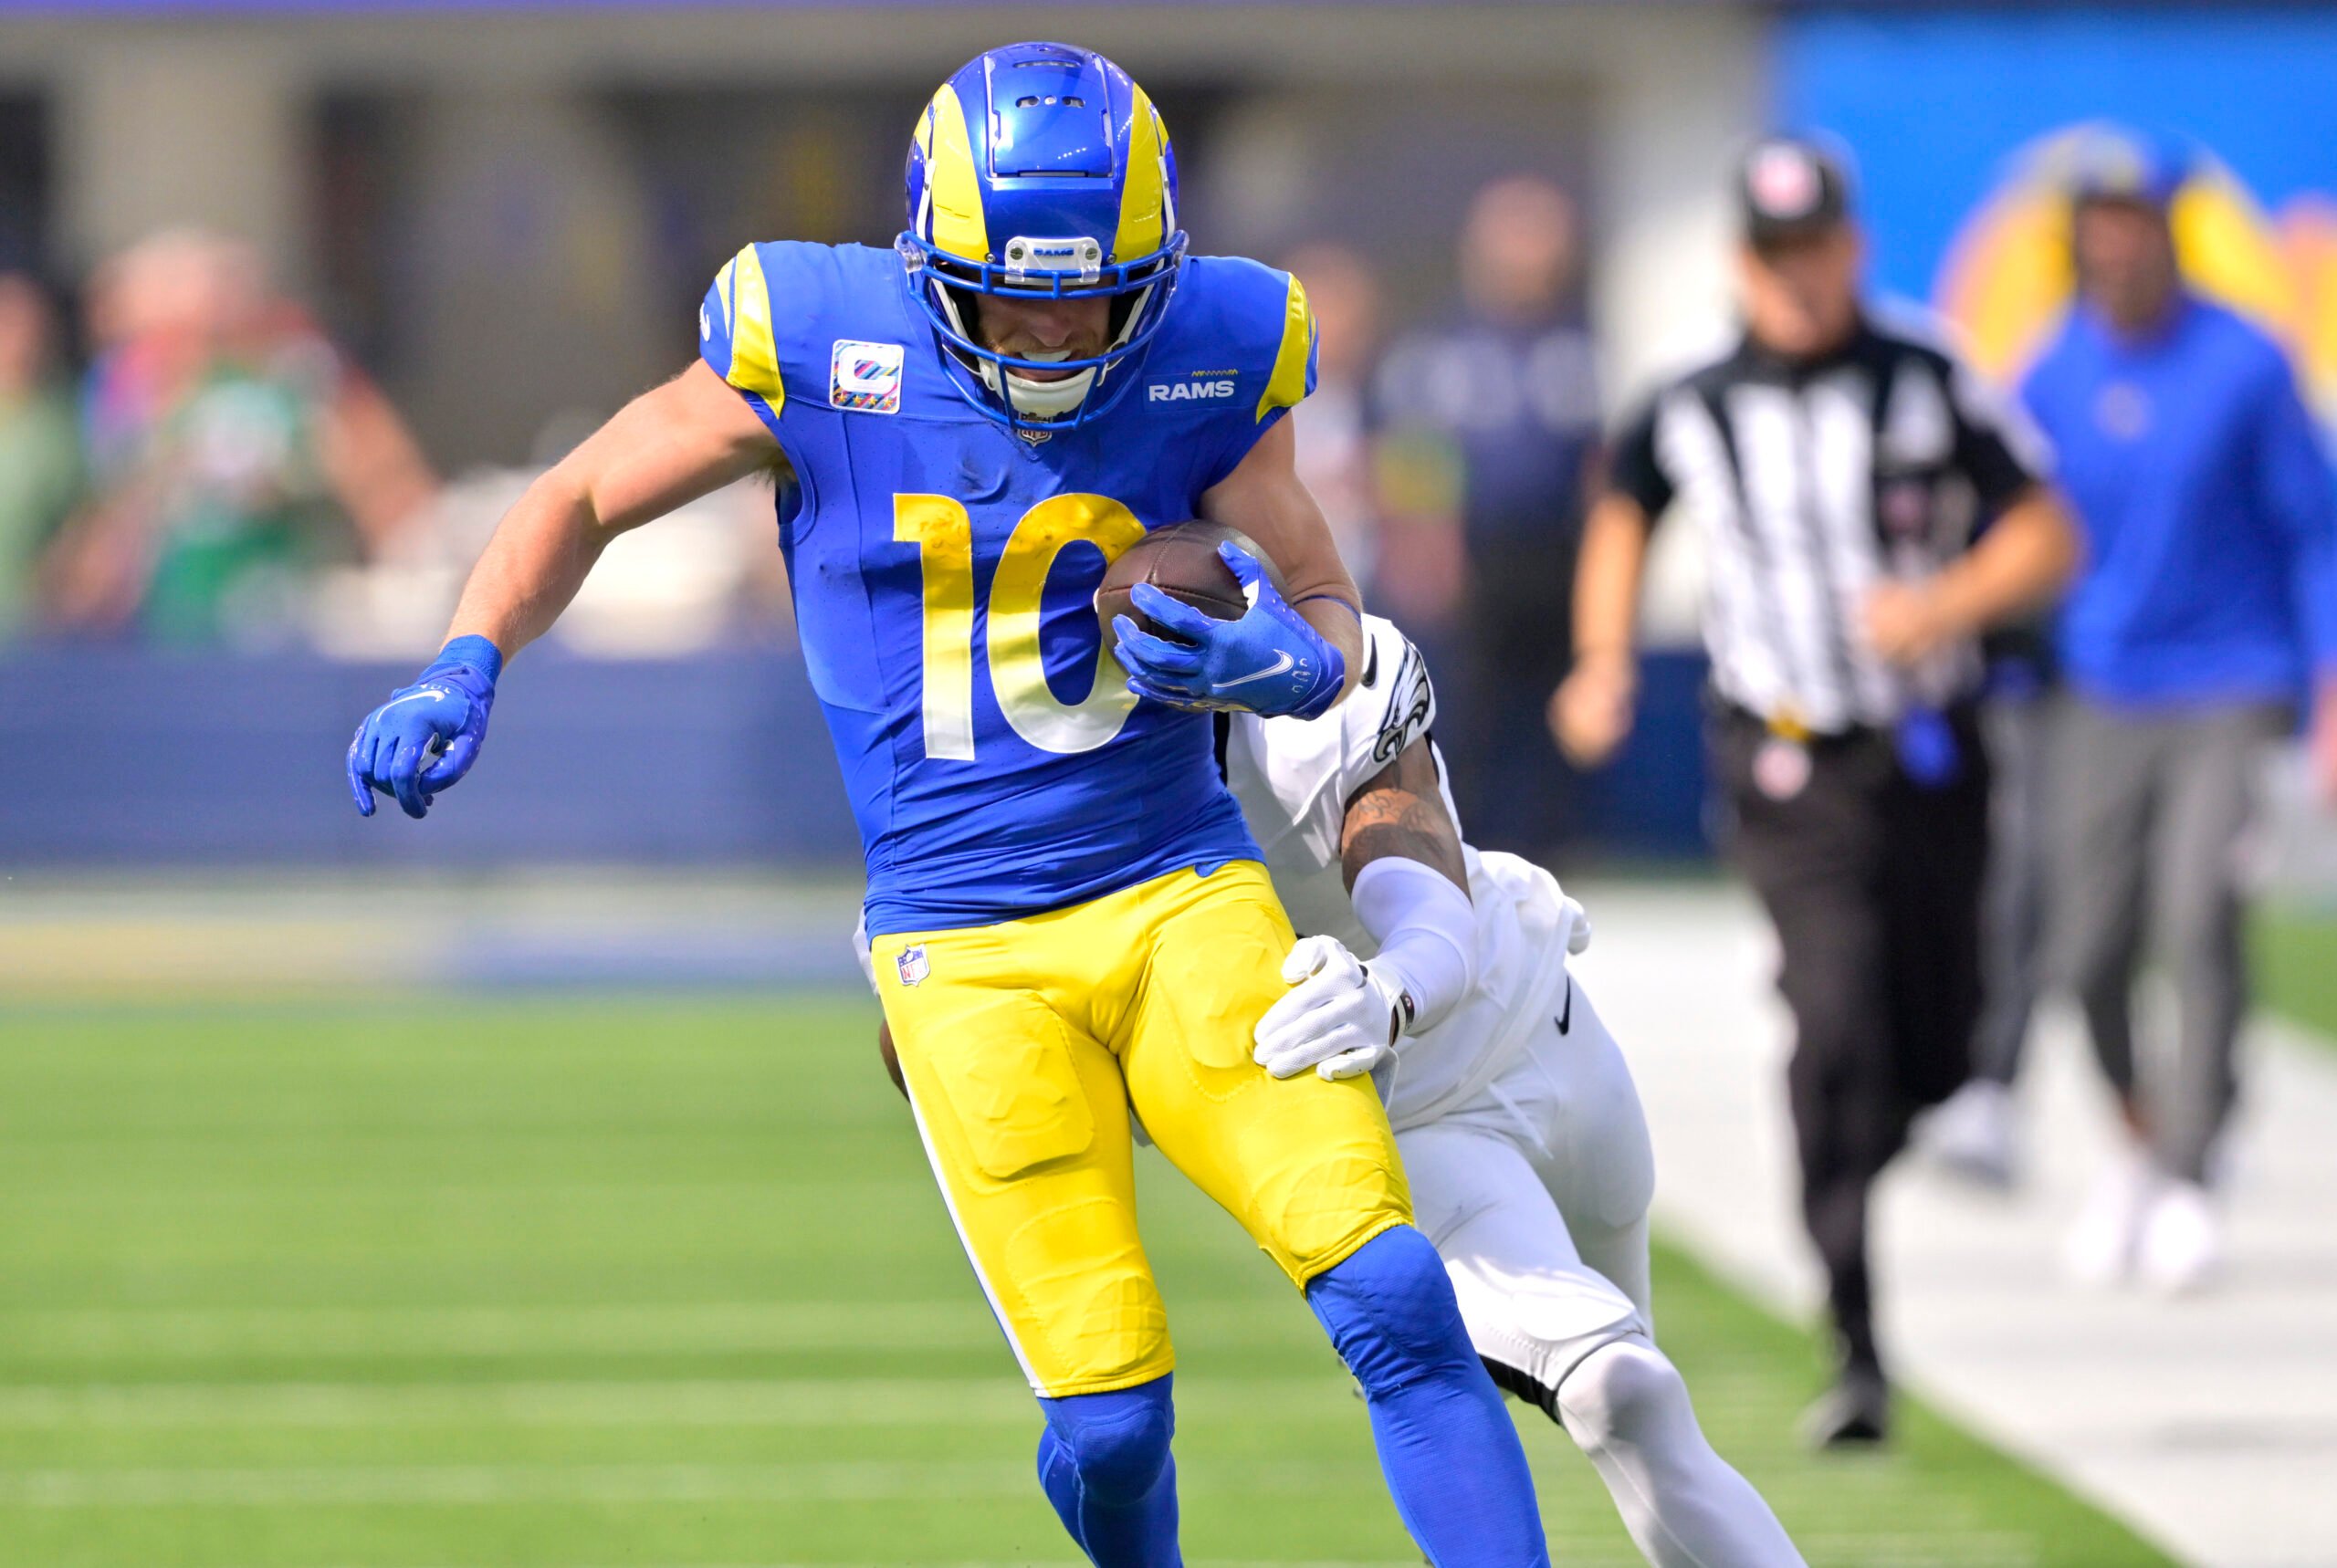 Highlights: Every Cooper Kupp Catch From 148-Yard Game vs